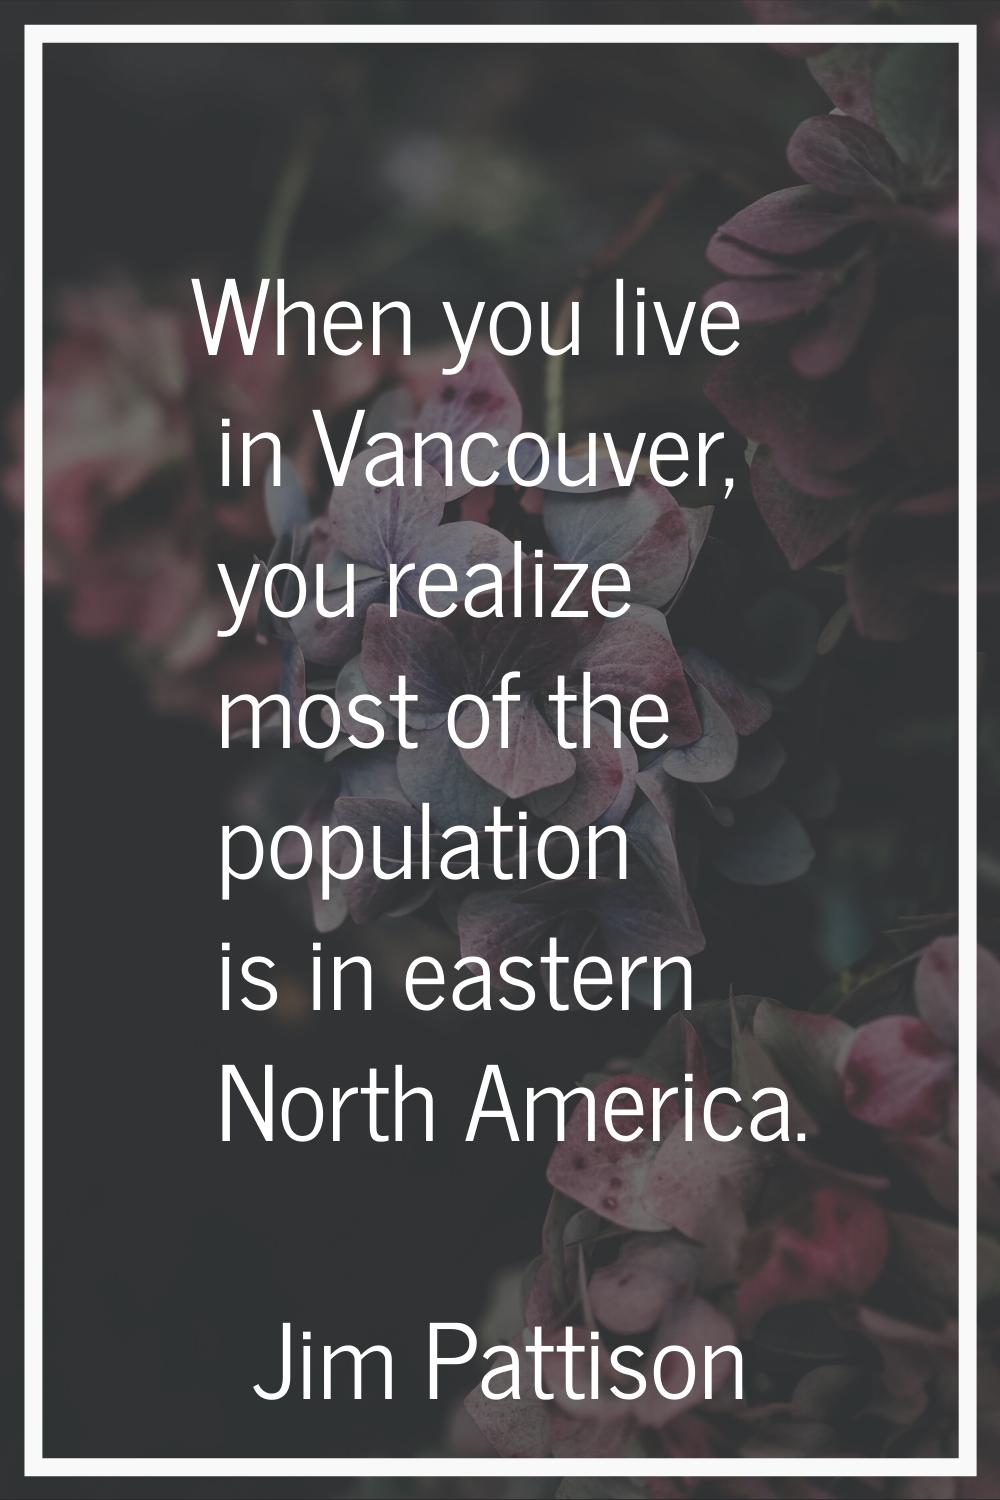 When you live in Vancouver, you realize most of the population is in eastern North America.